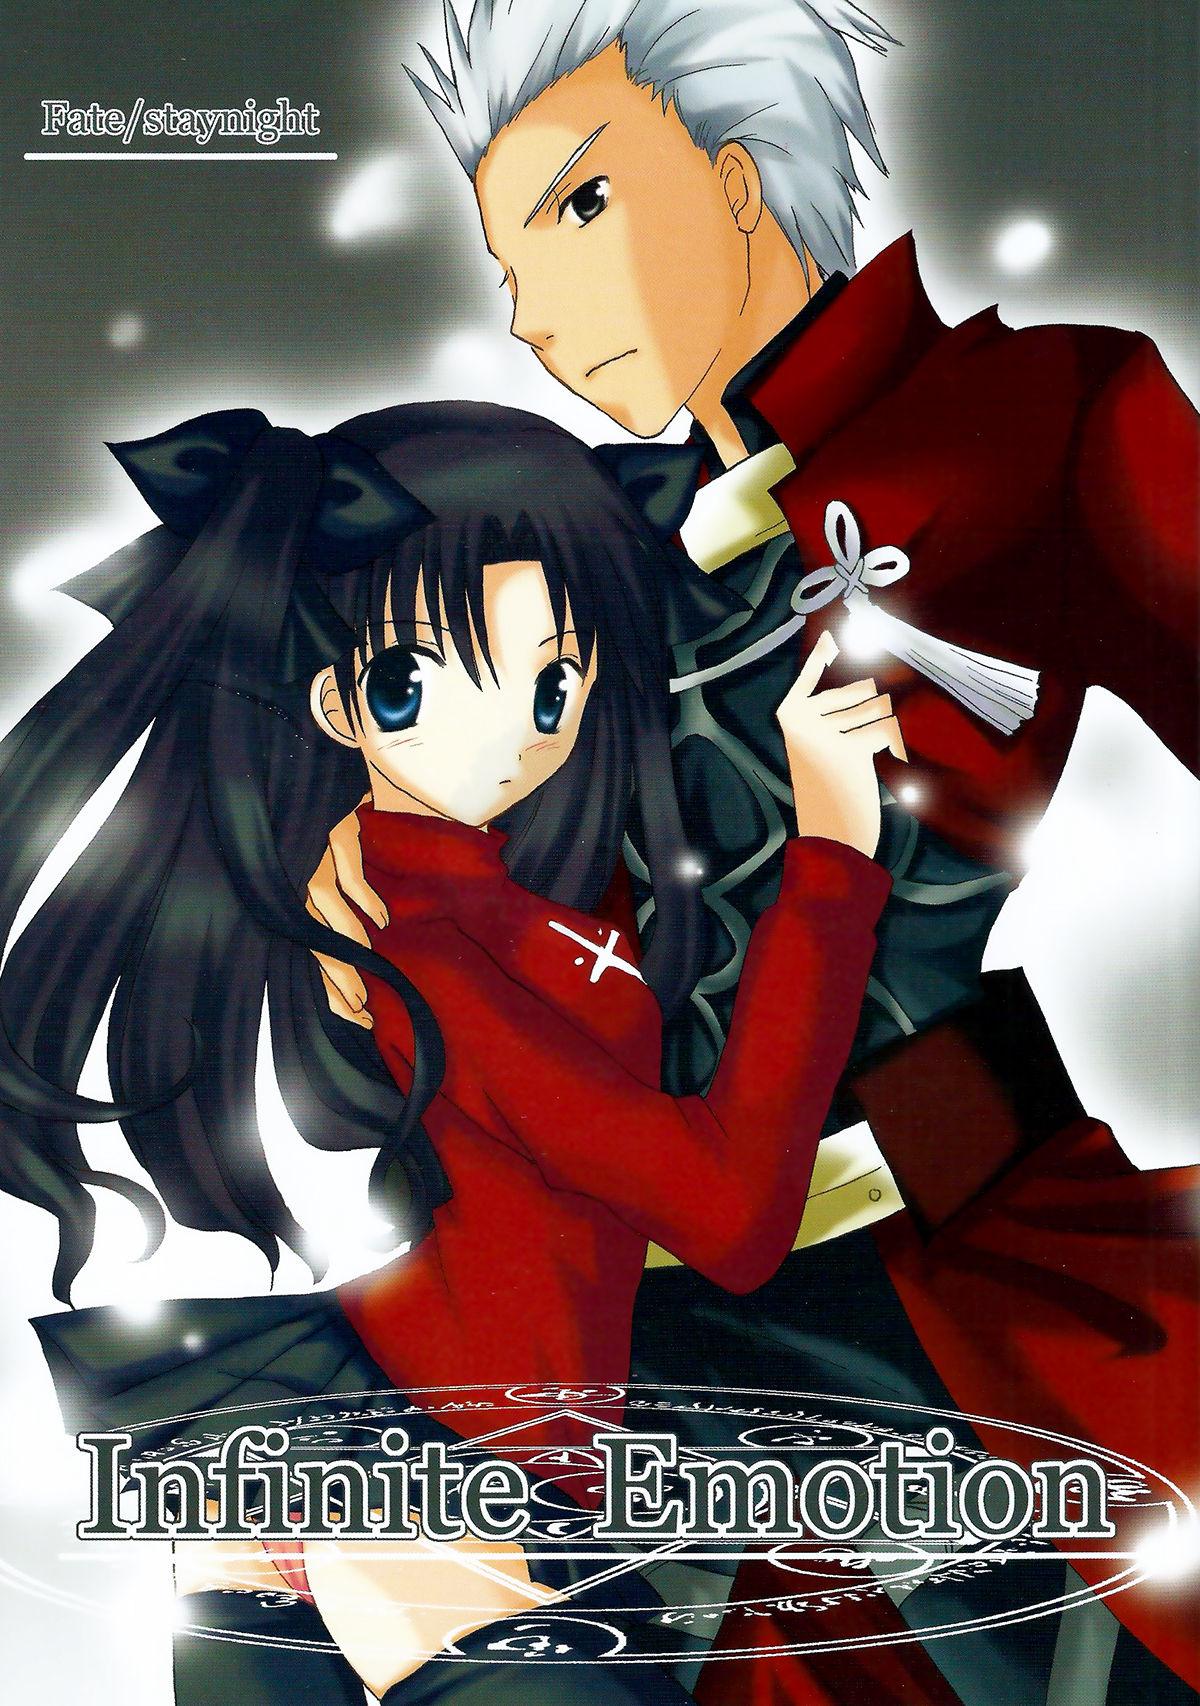 Eurosex Infinite Emotion - Fate stay night Spying - Picture 1